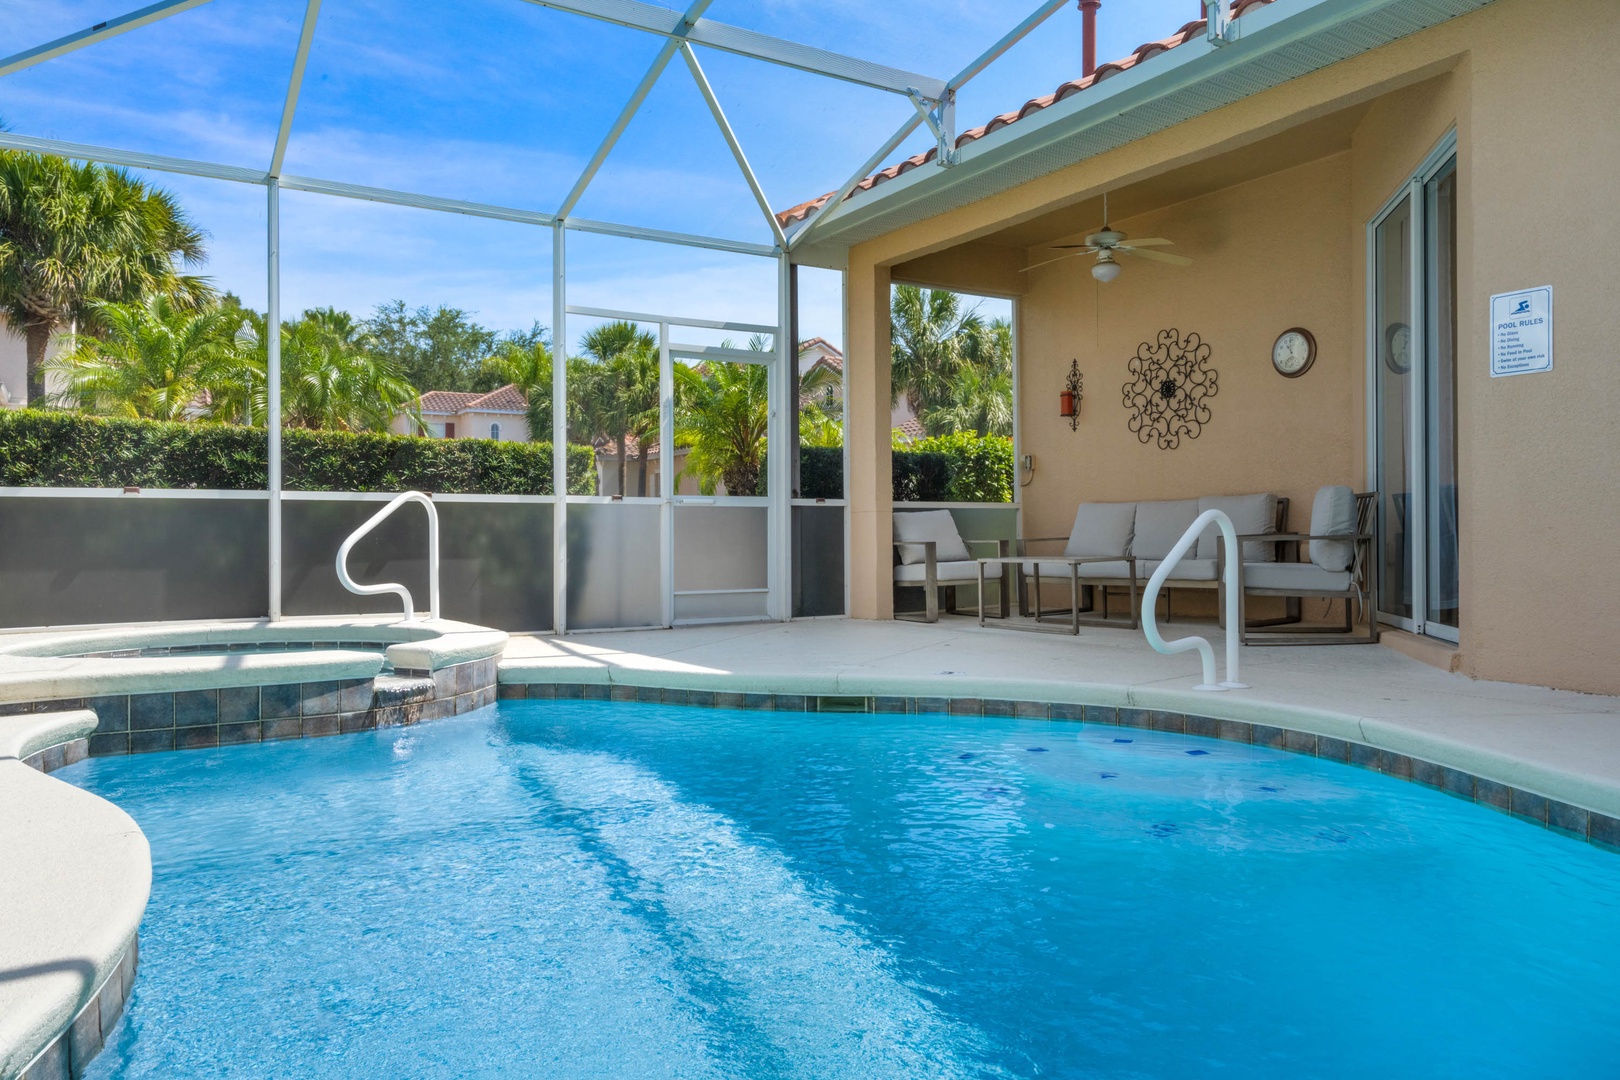 Make a splash in your very own sparkling covered pool after a day exploring the best of Orlando